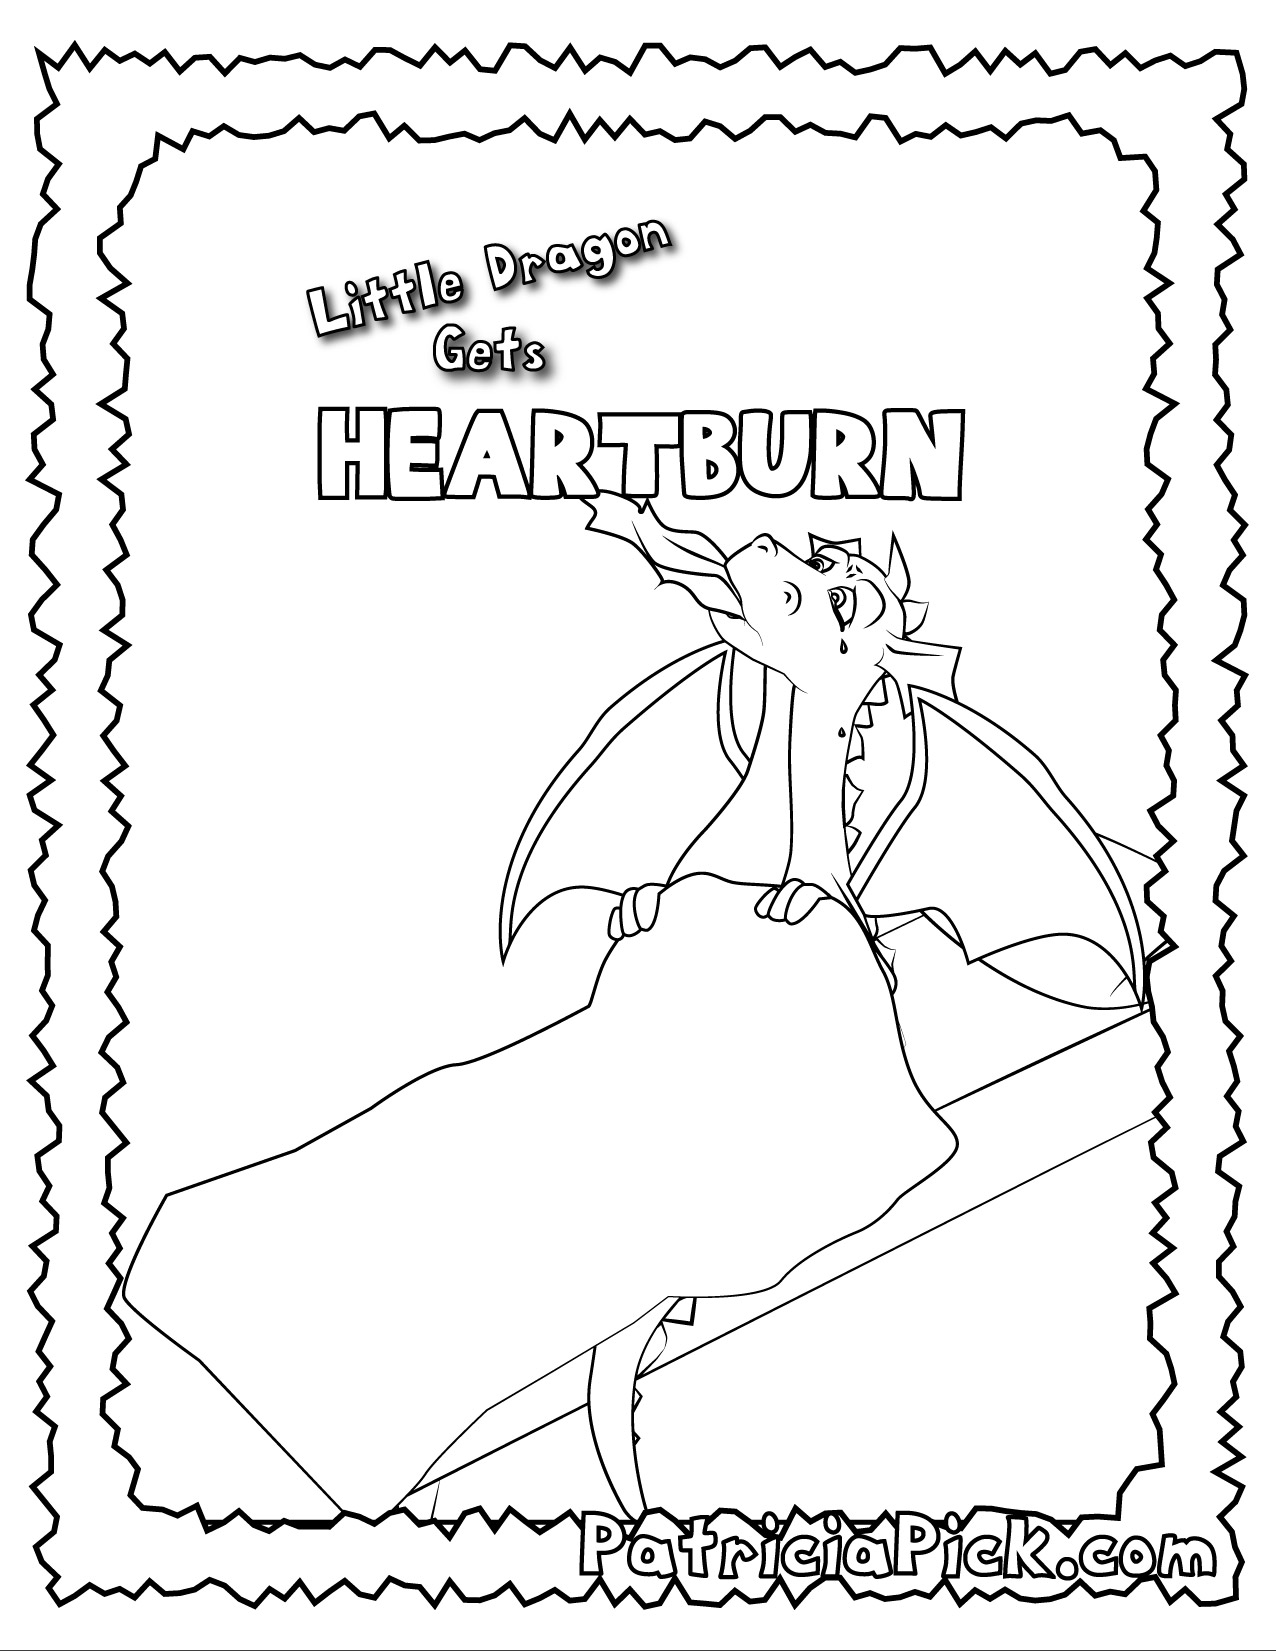 Little Dragon Gets Heartburn Front Cover Coloring Page